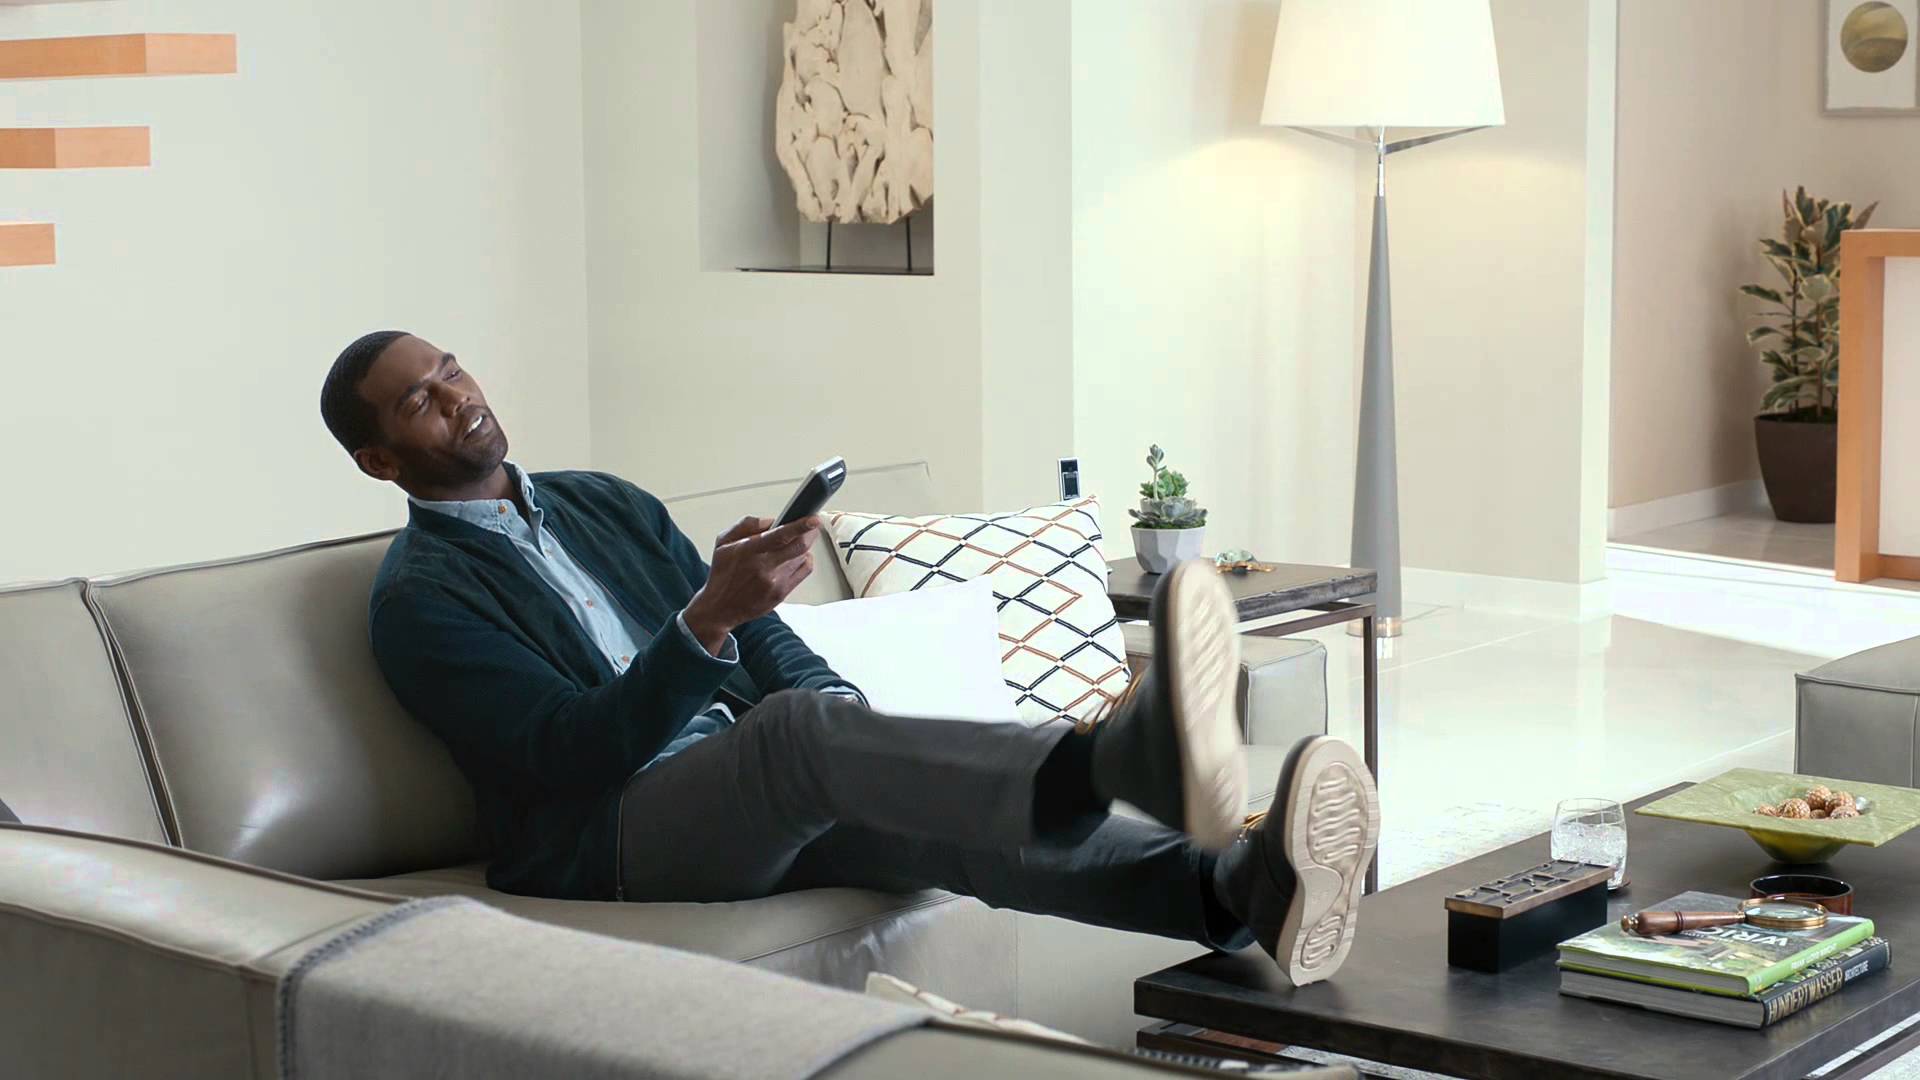 New DirecTV Randy Moss commerical with 